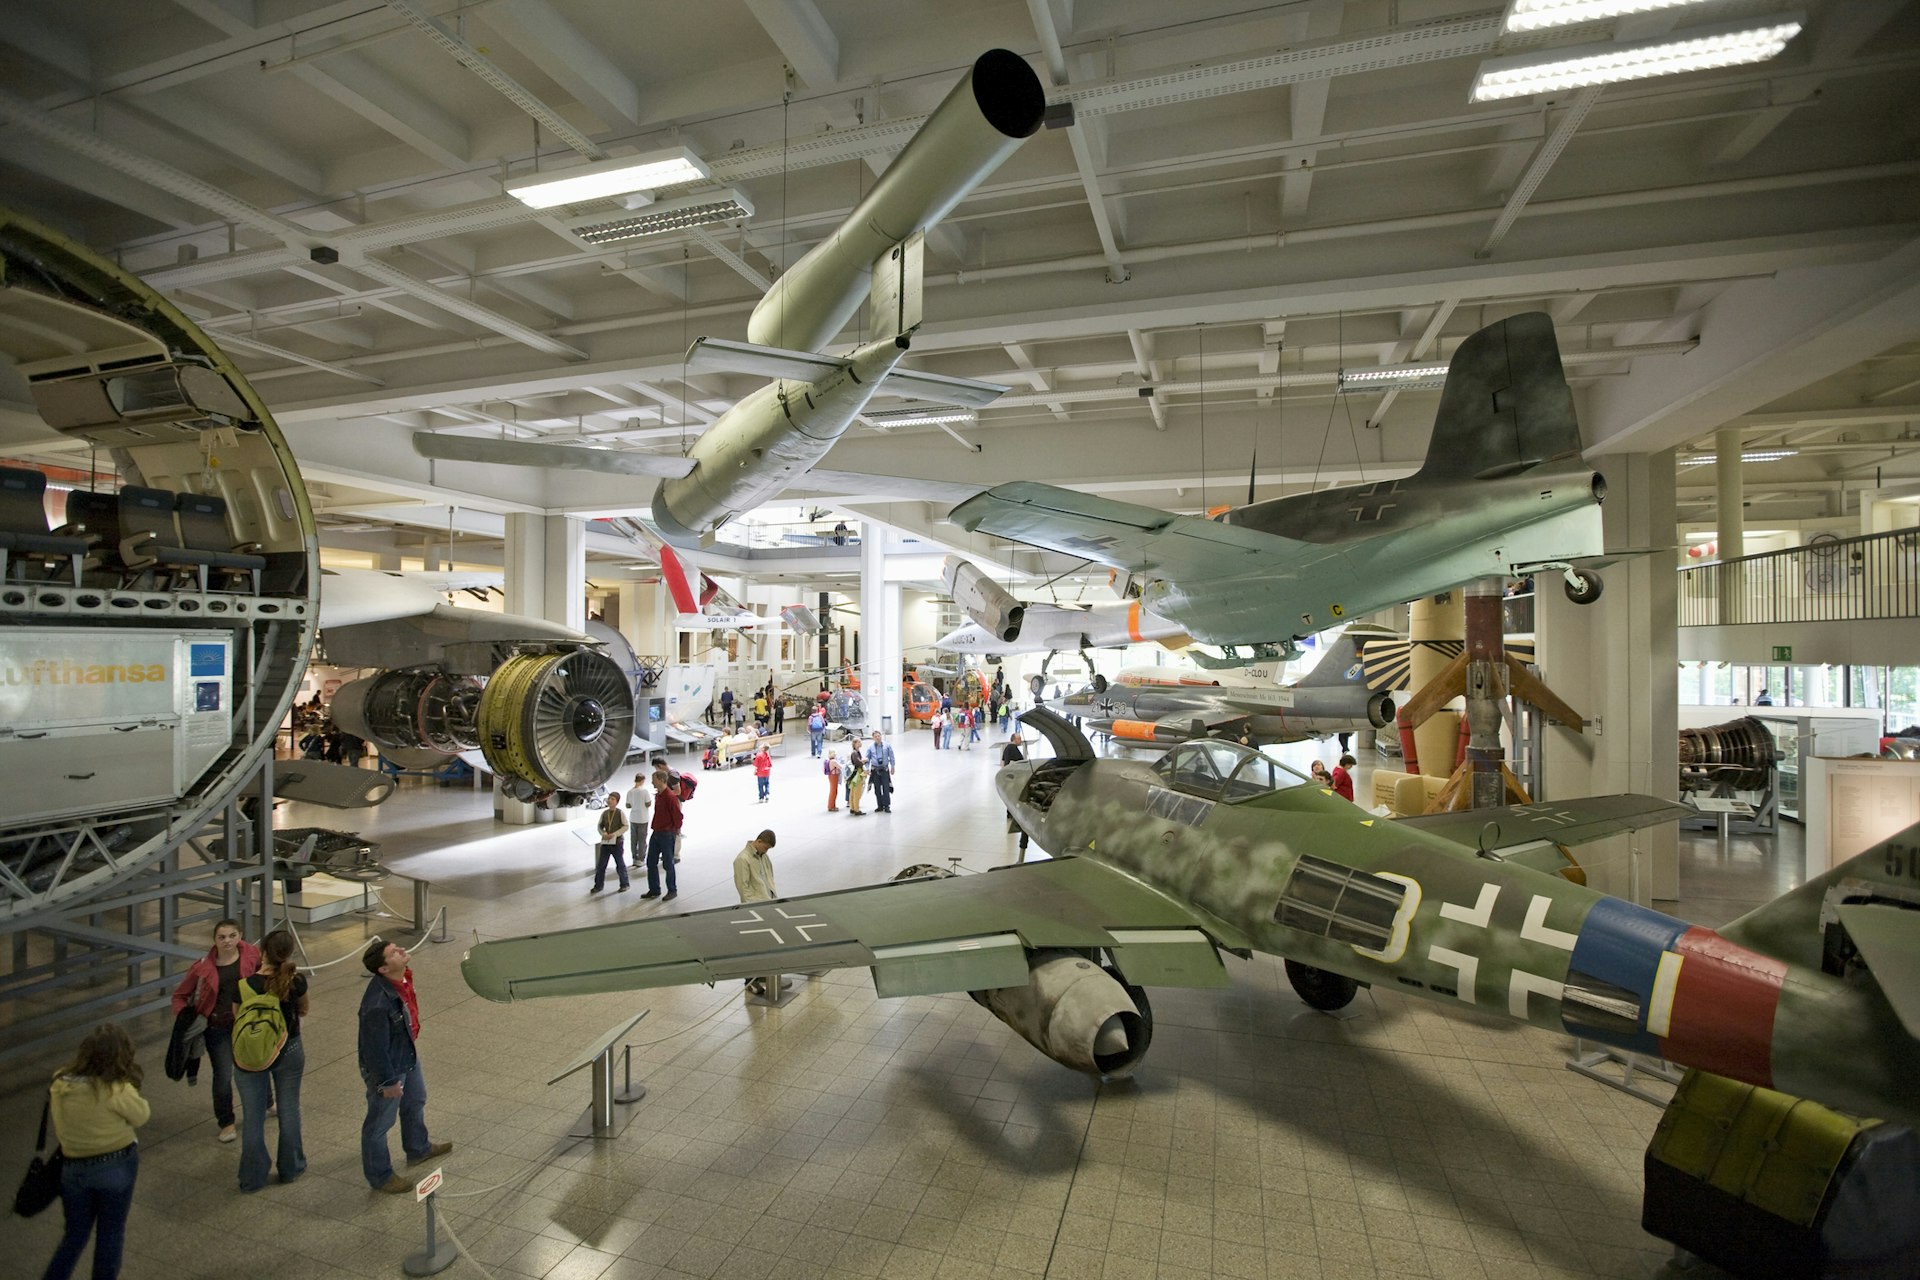 An aircraft display at a museum with lots of people walking around among planes and engines